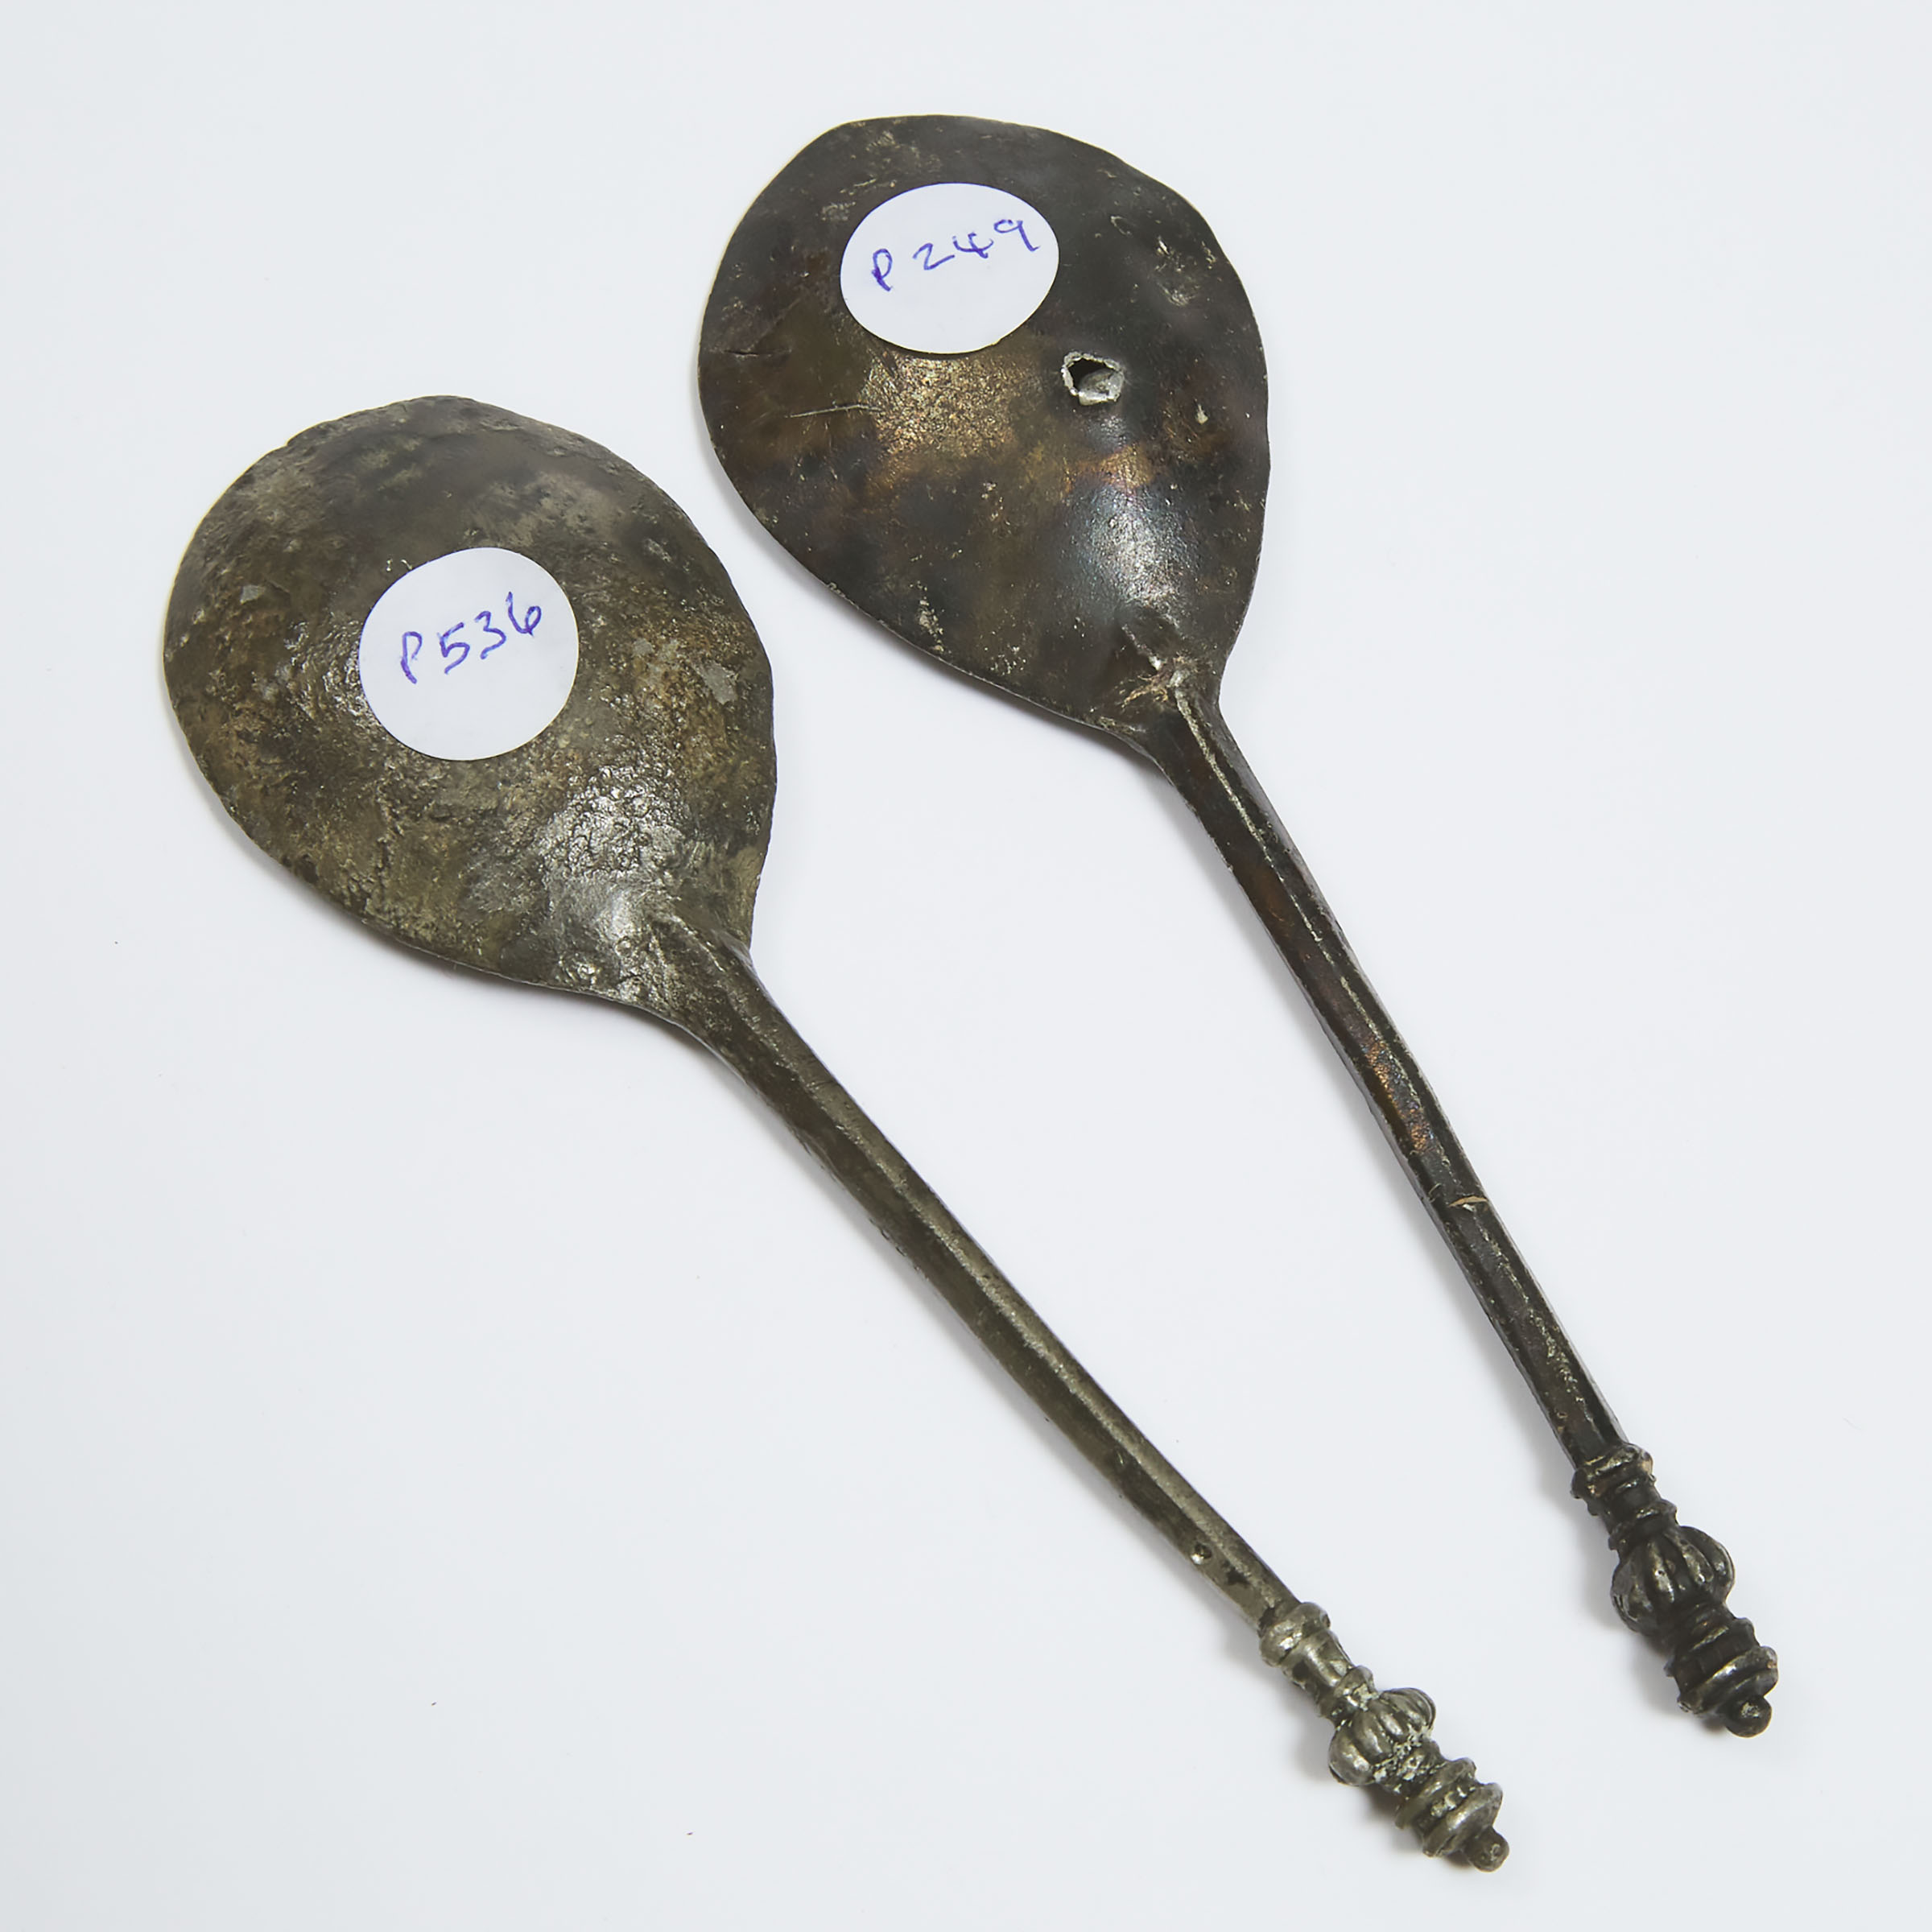 Two English Baluster Knop Spoons, 16th century